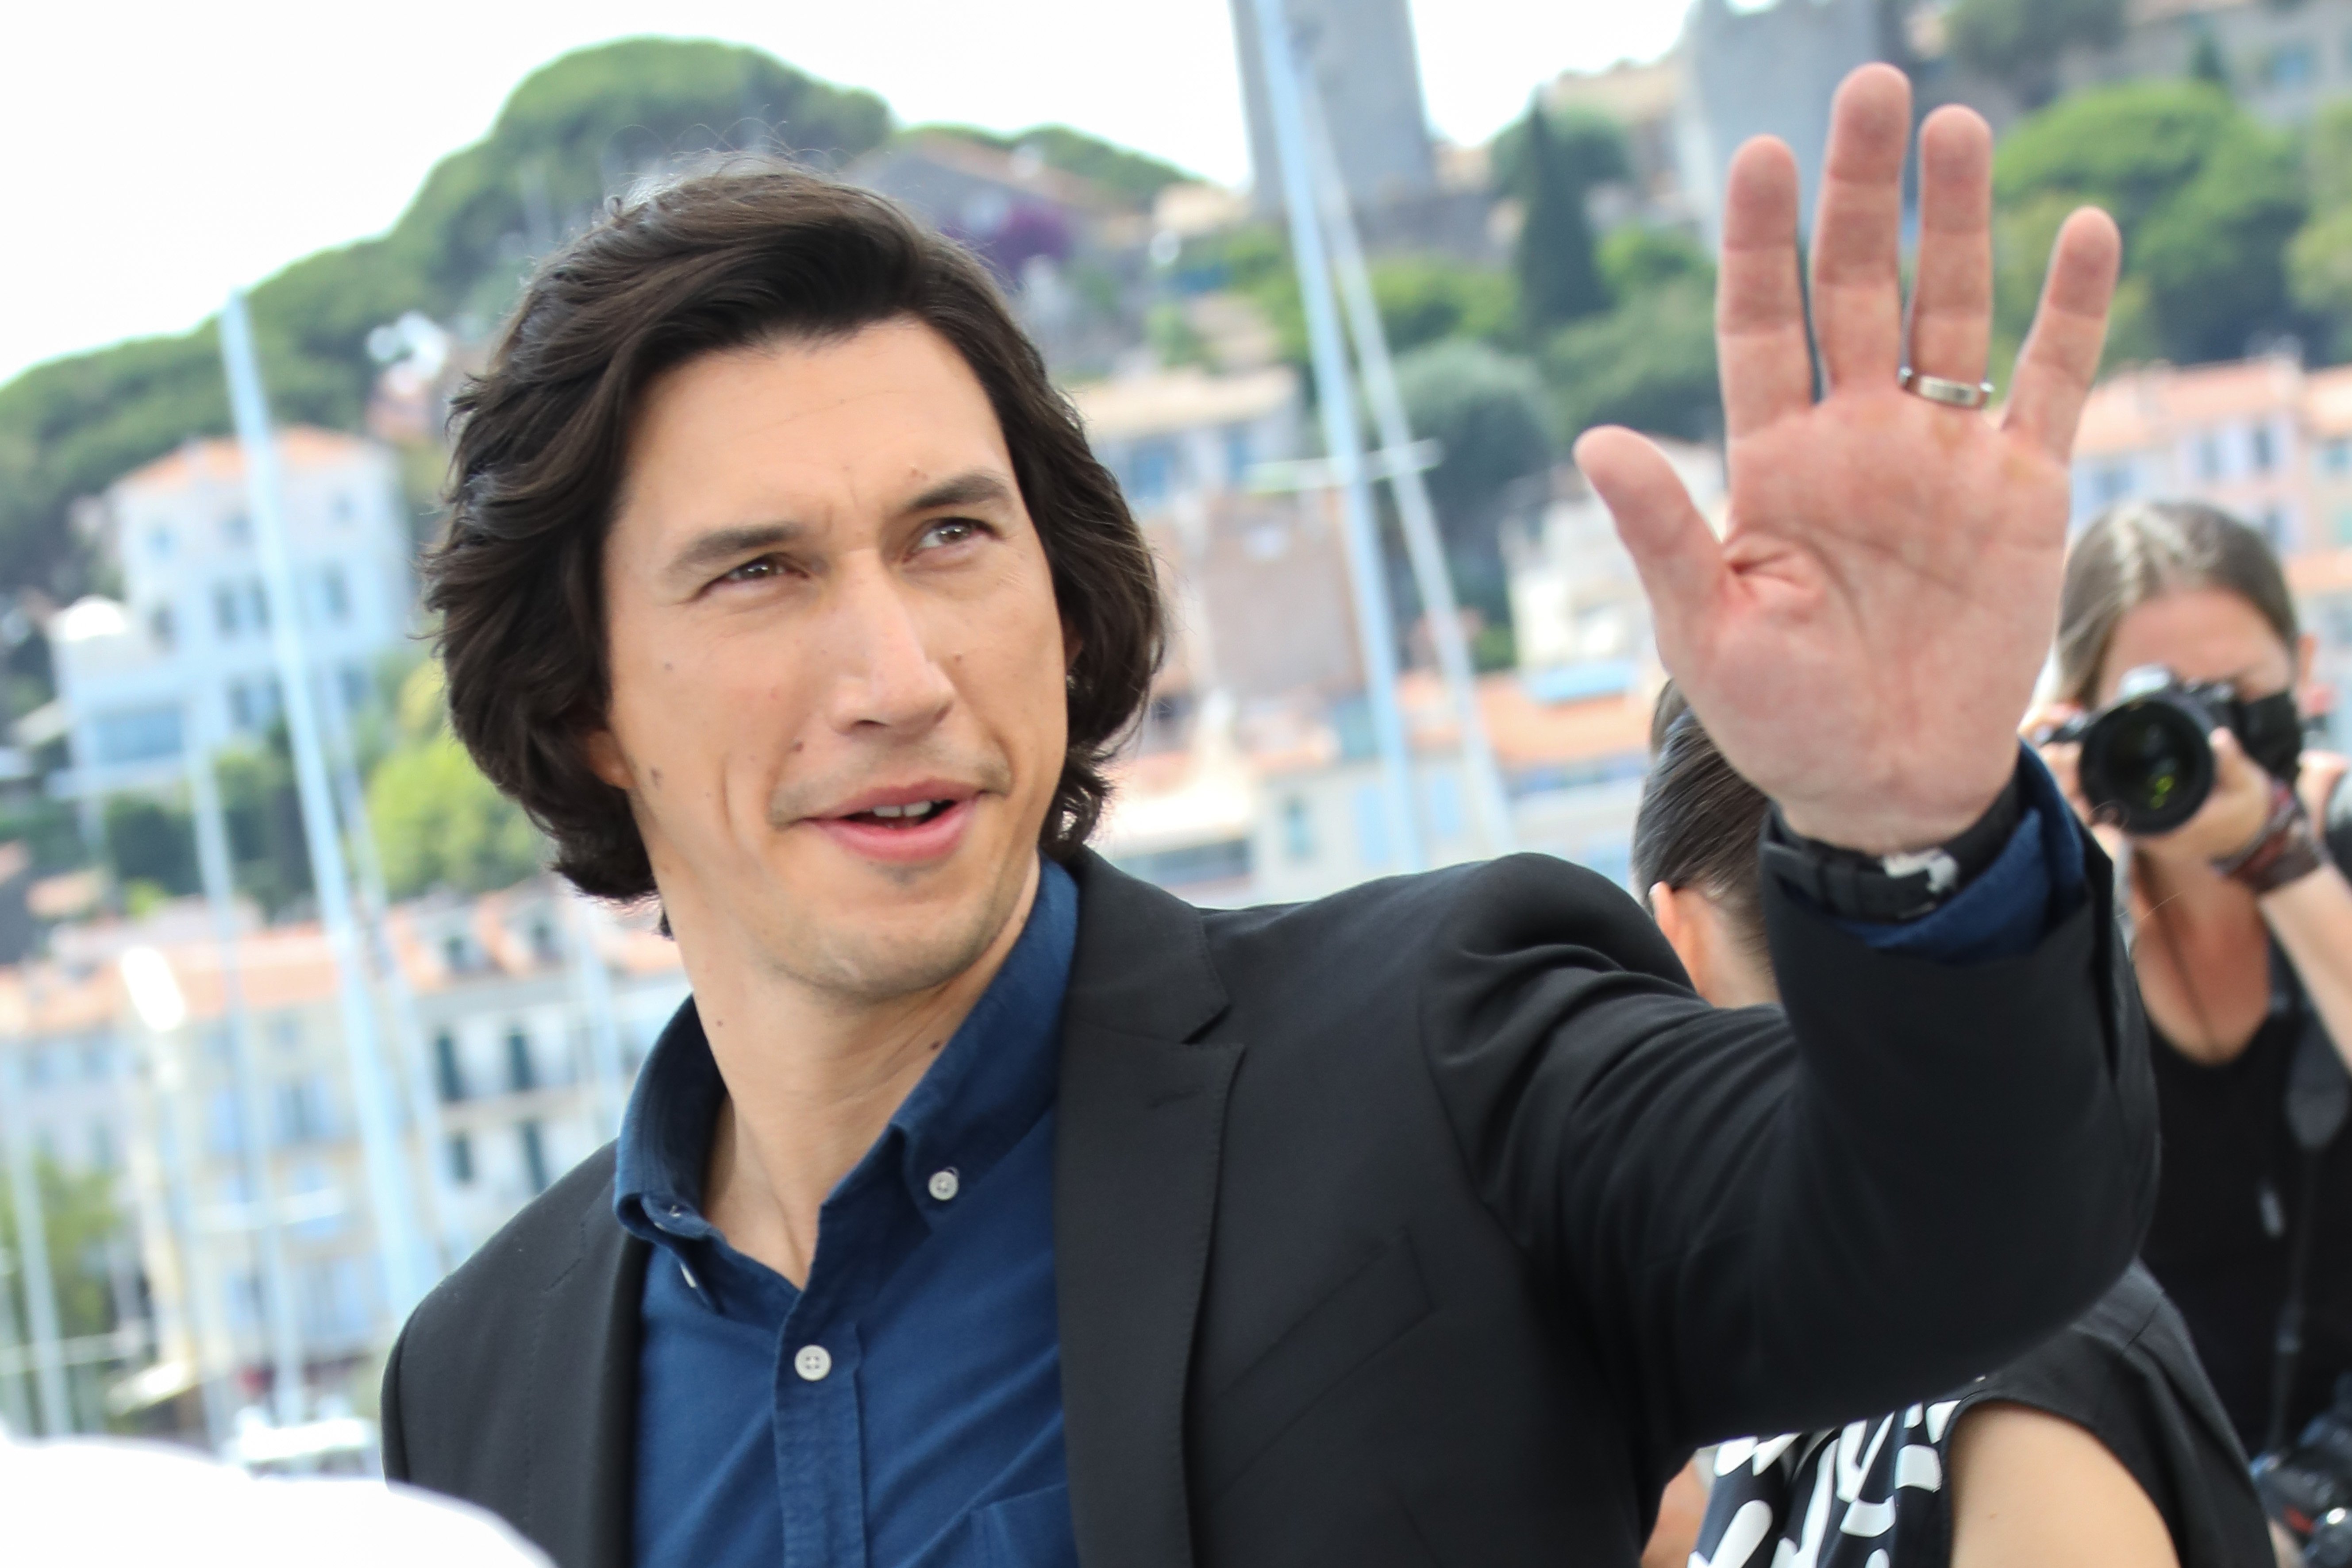 Adam Driver attends the 'Annette' photocall at the 74th Cannes Film Festival in France